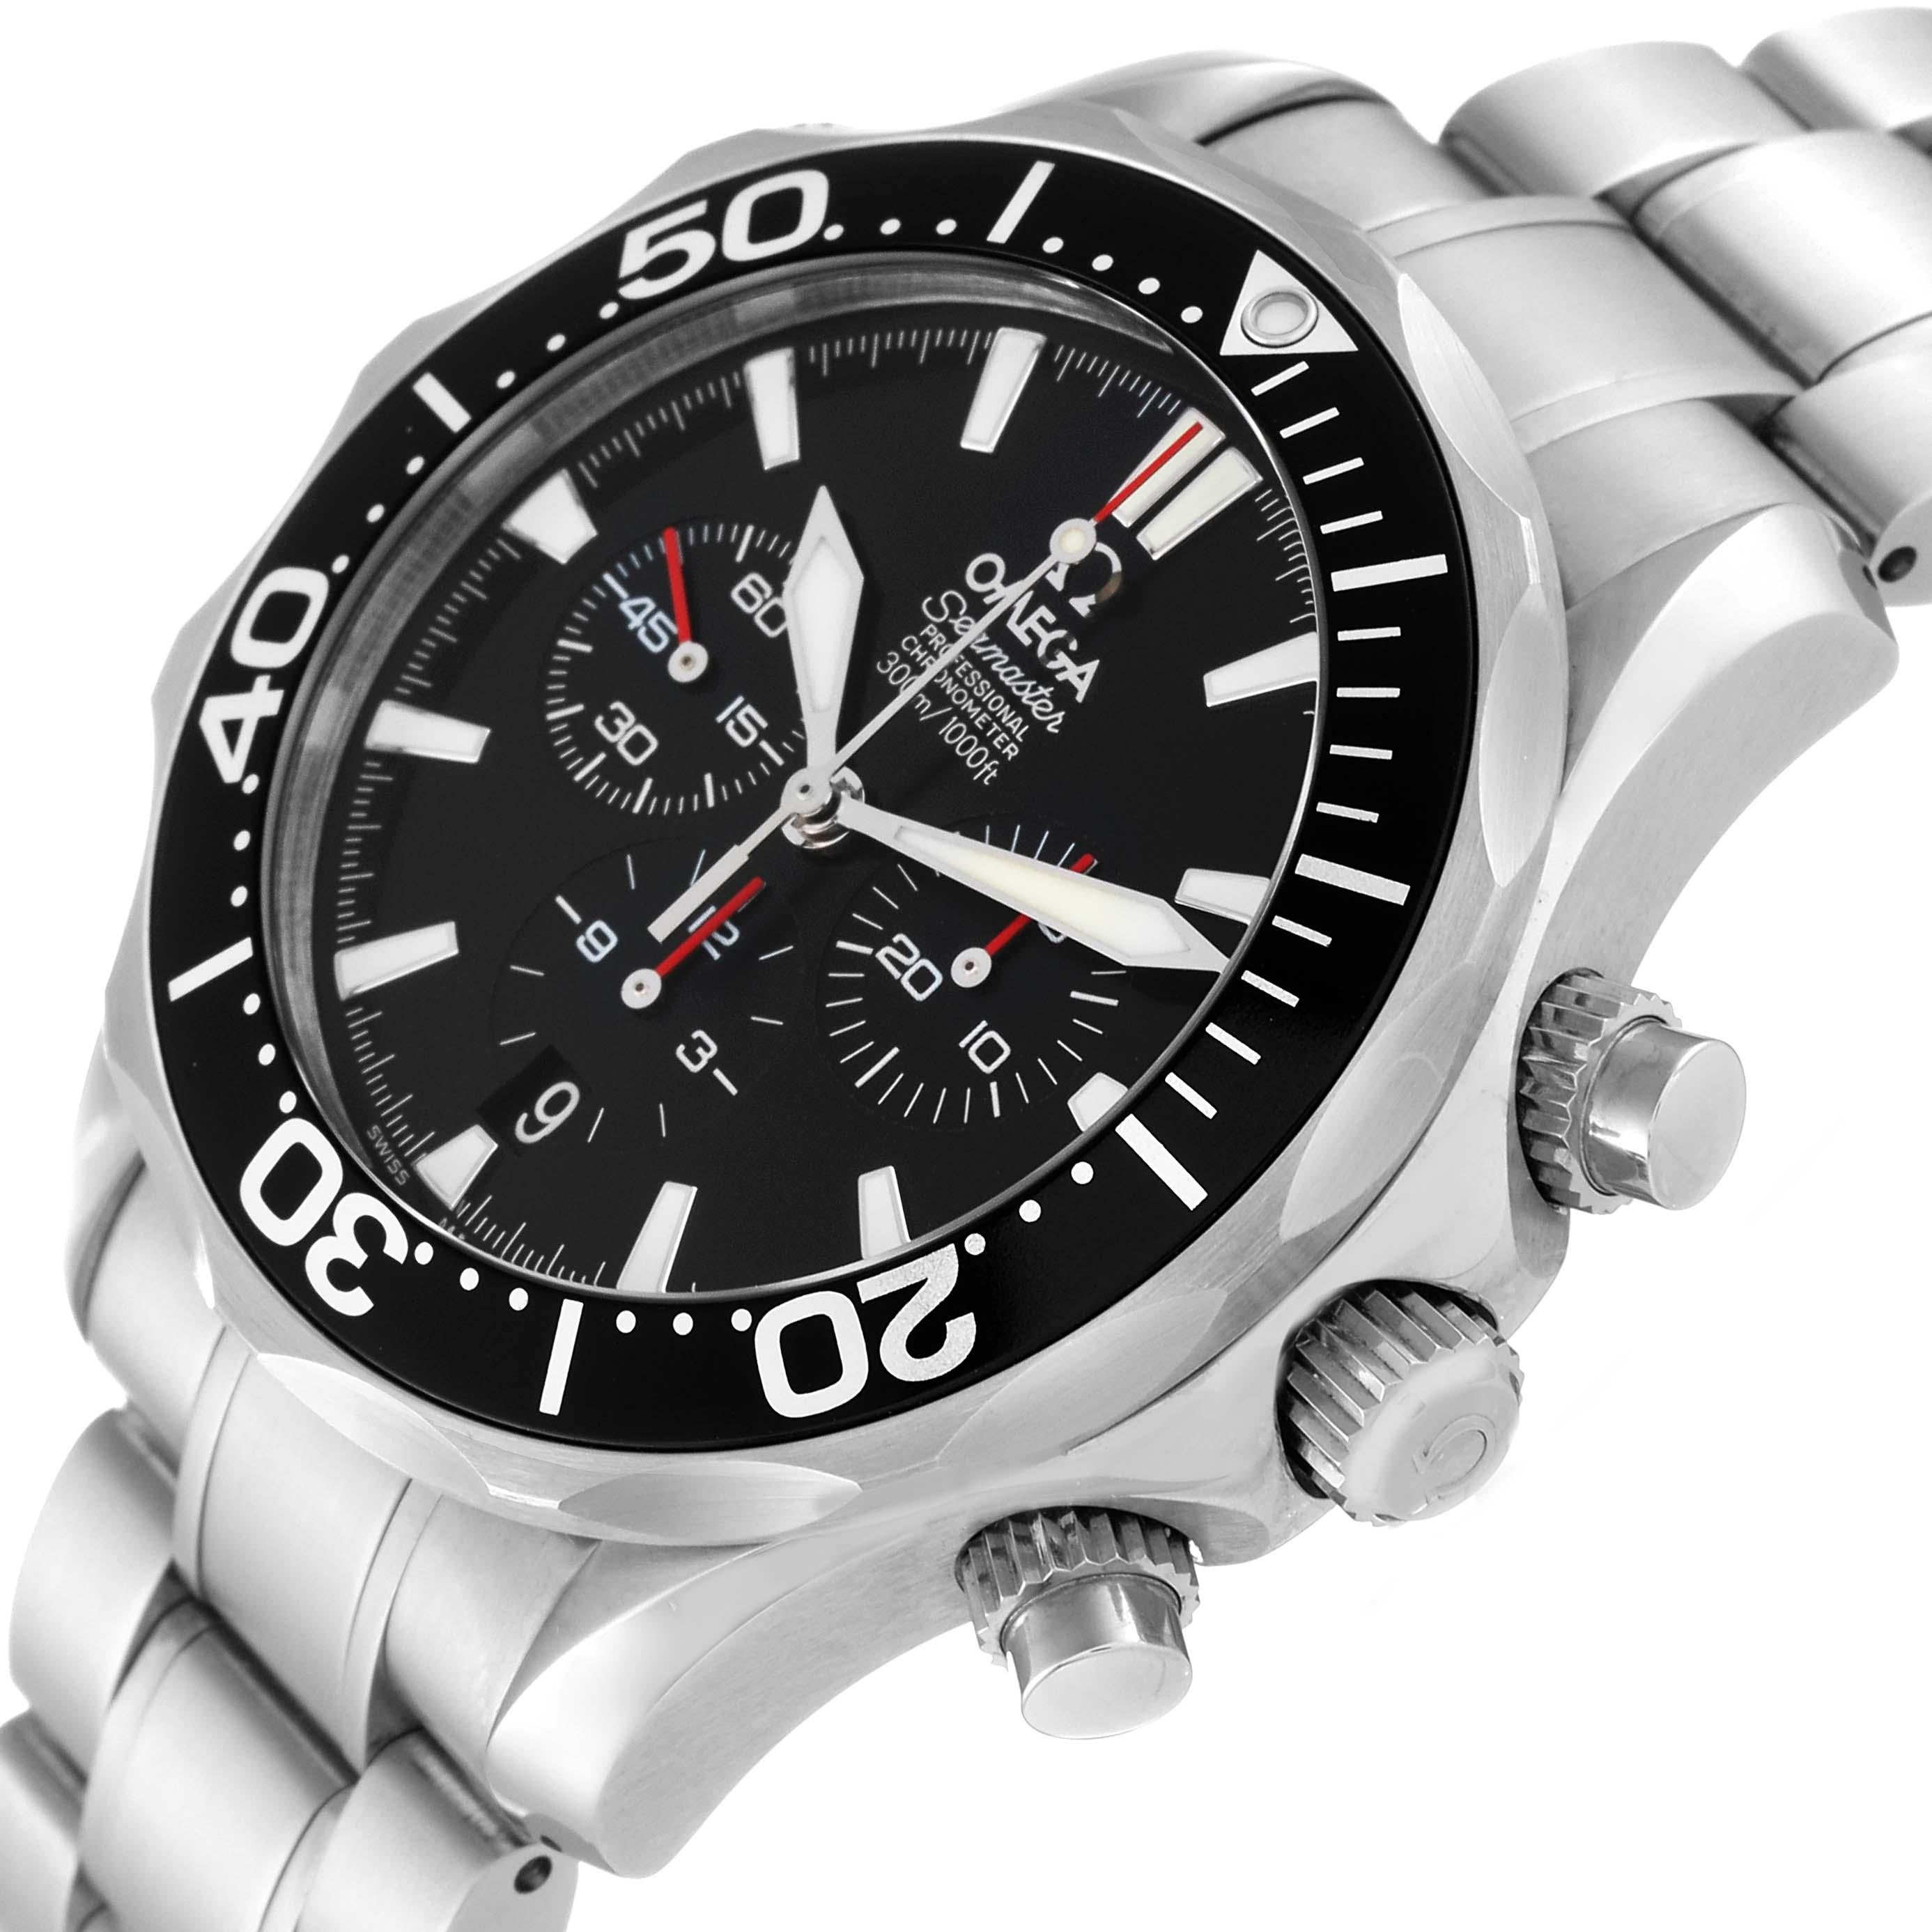 Omega Seamaster Chronograph Black Dial Steel Mens Watch 2594.52.00 Box Card For Sale 5